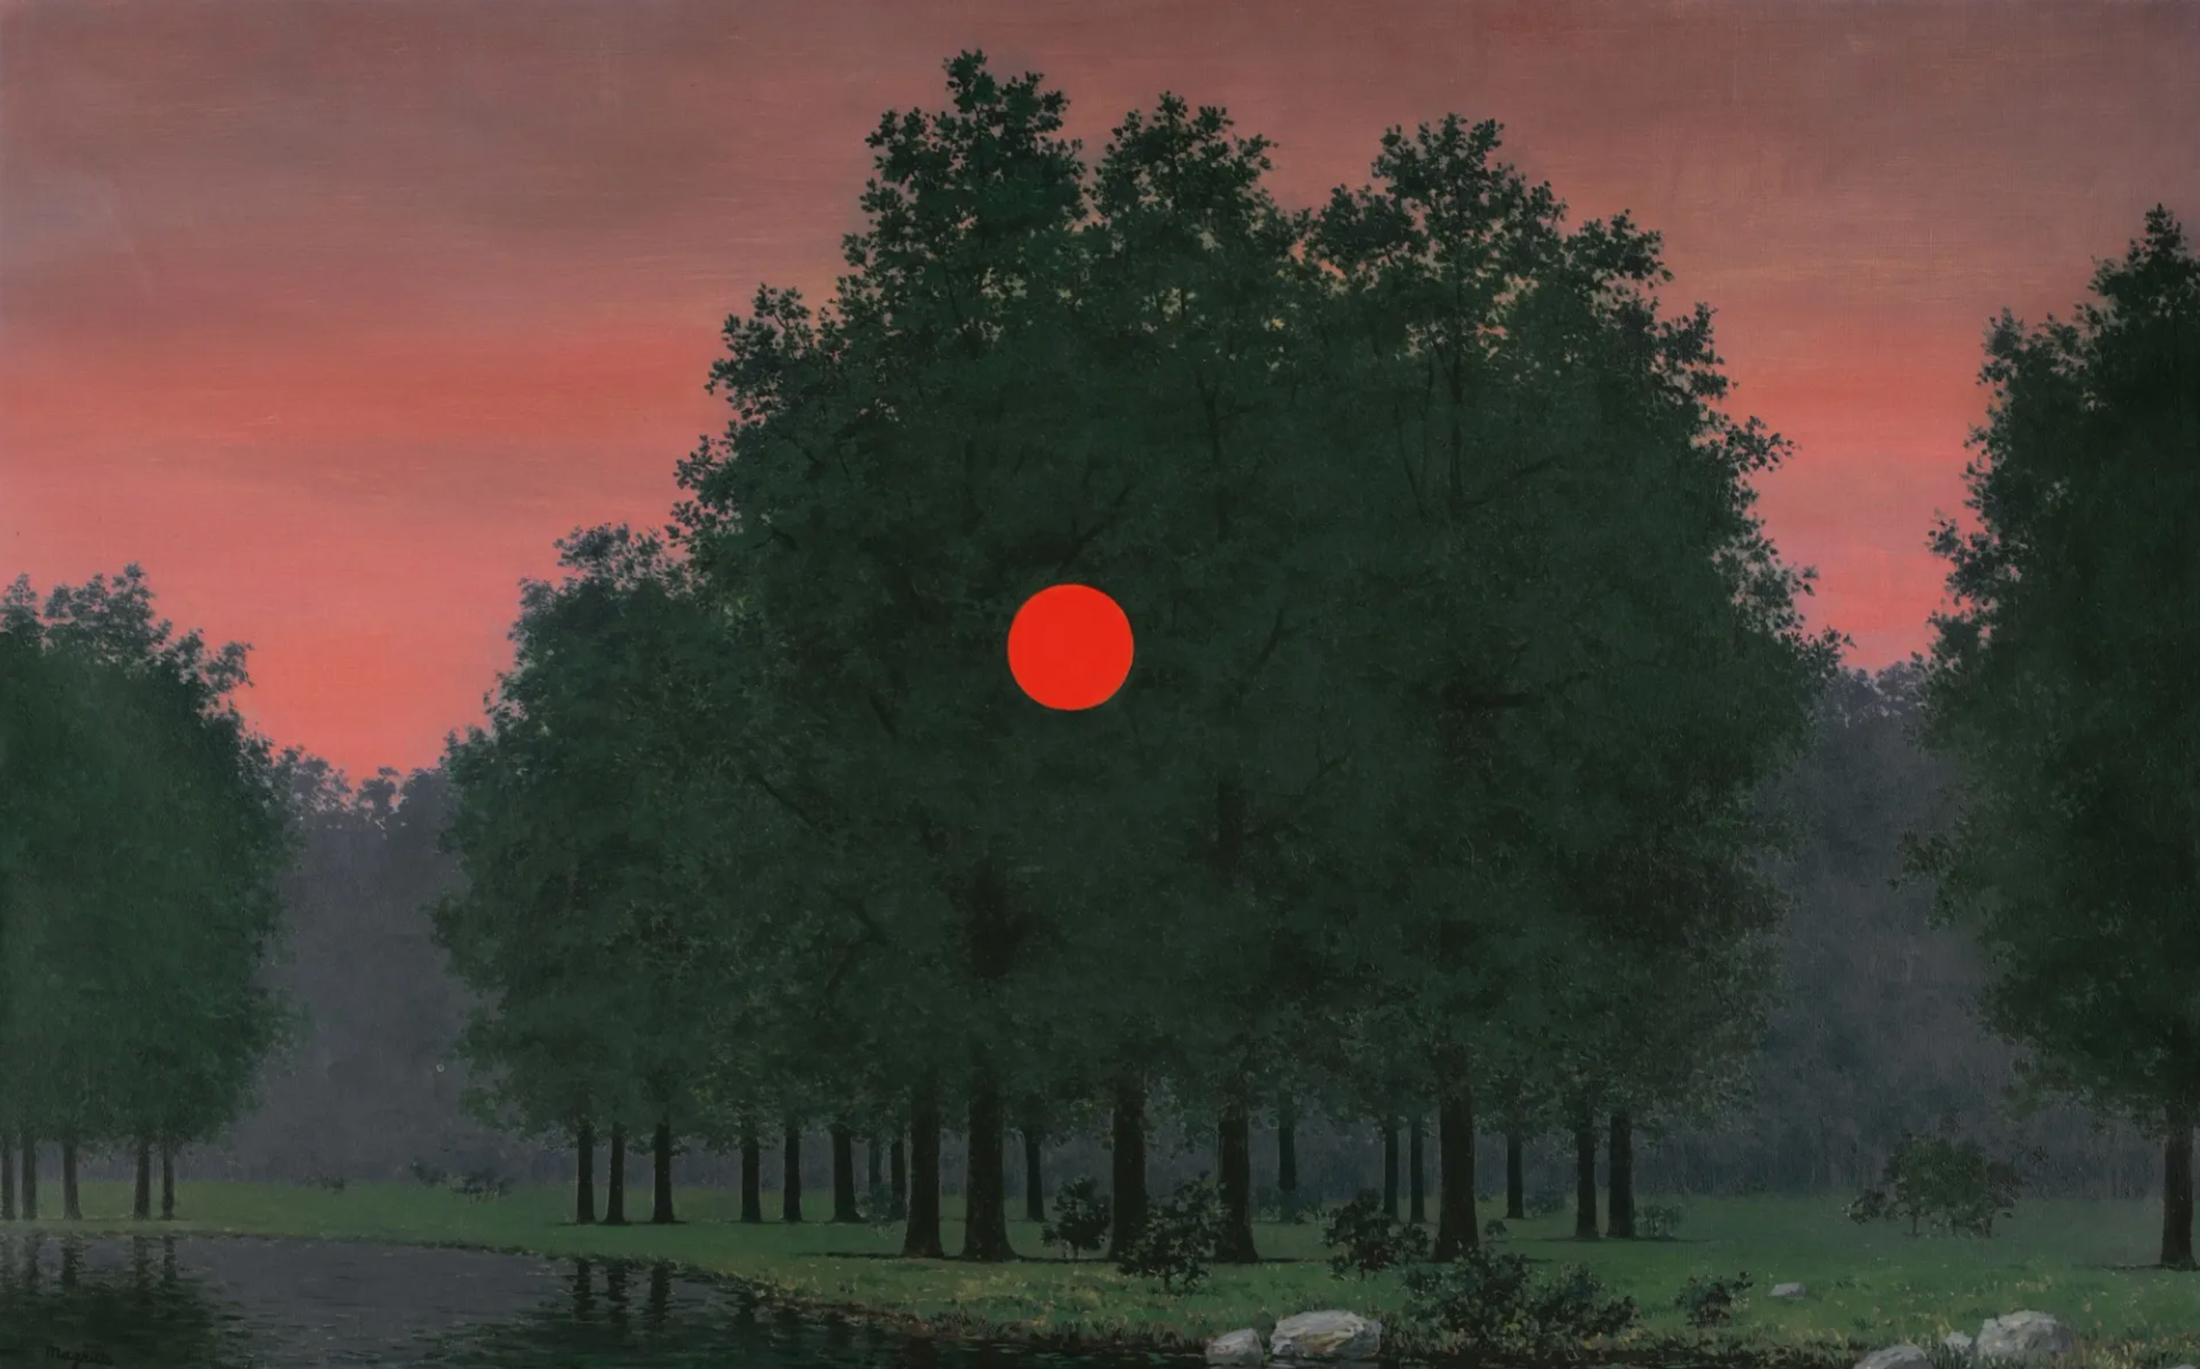 Rene Magritte, Le Banquet (around 1955-57)Courtesy Sotheby's